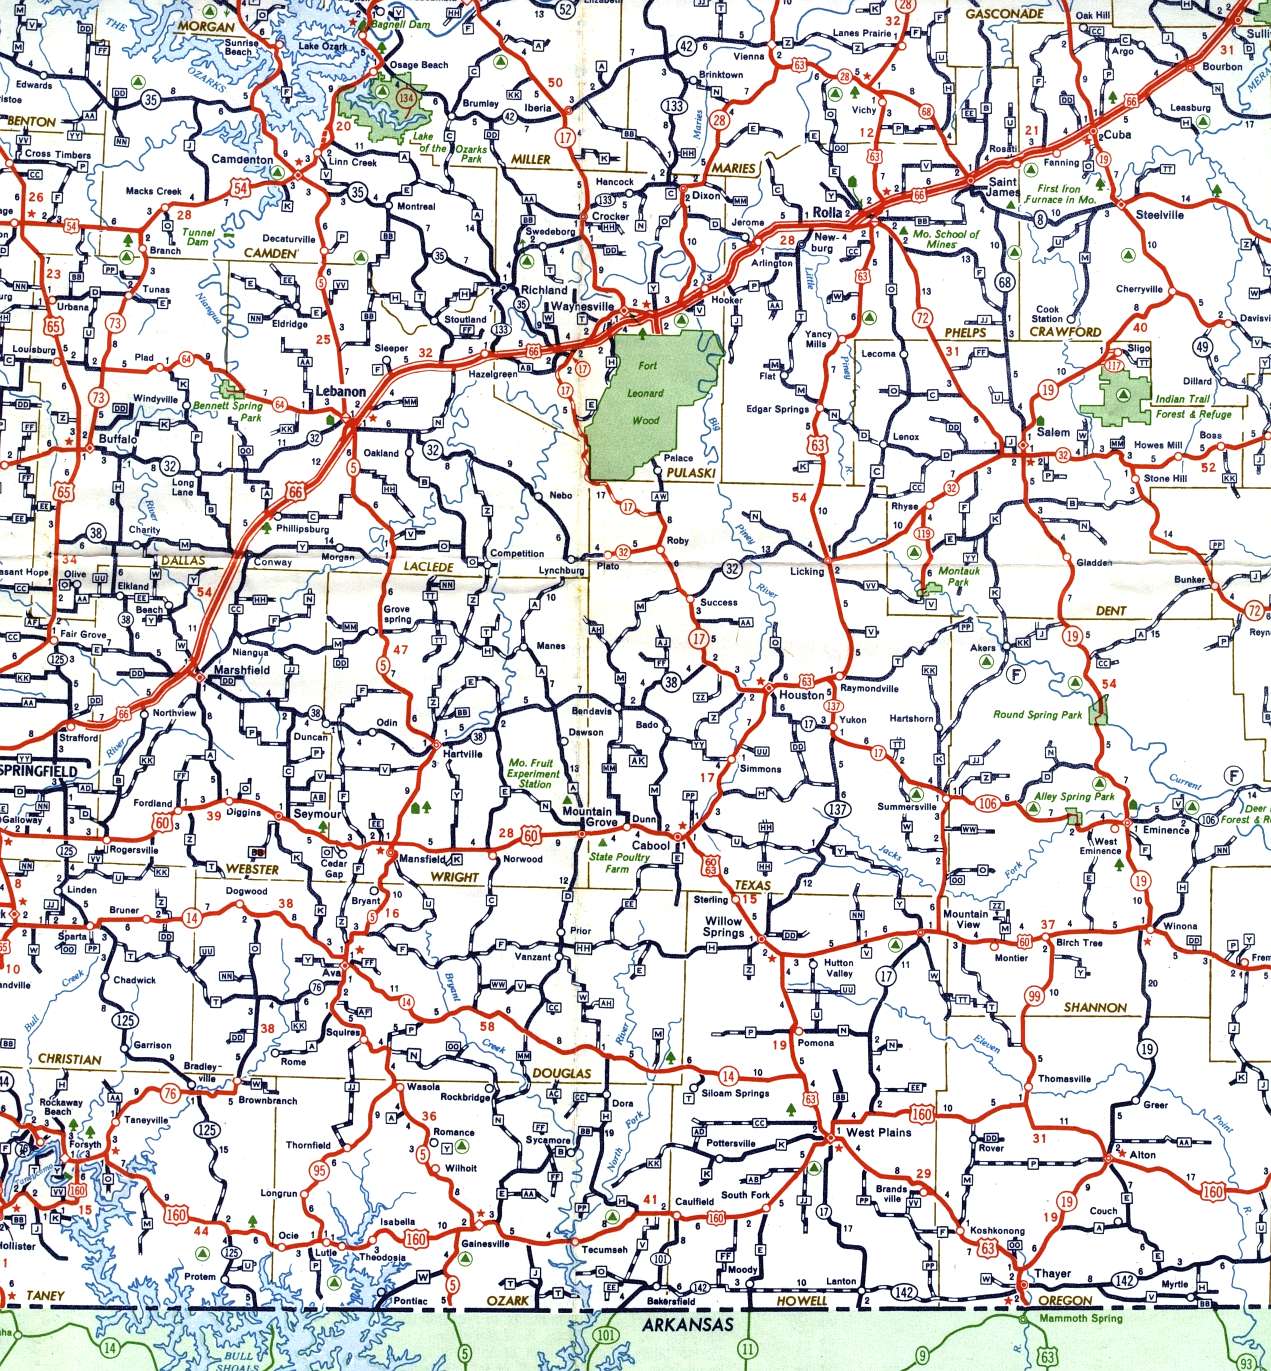 South-central section of Missouri from 1958 official highway map